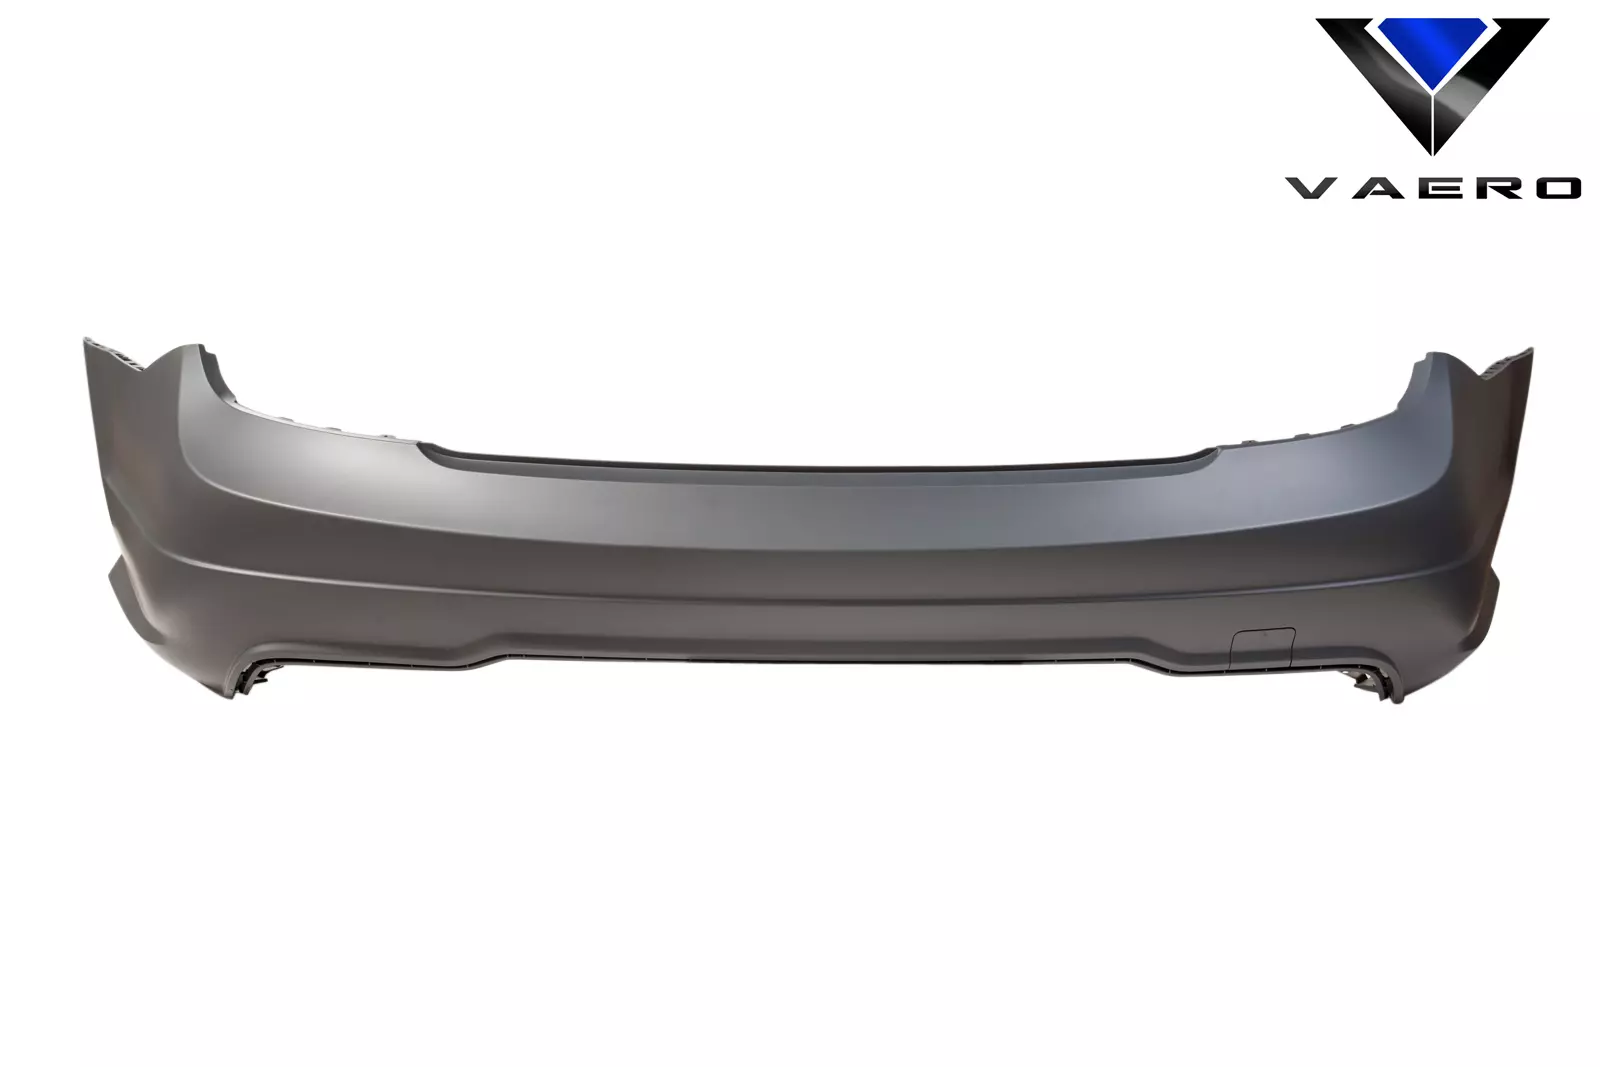 2008-2014 Mercedes C Class W204 C250 Vaero C63 V2 Look Rear Bumper Cover ( with PDC ) 2 Piece - Image 3